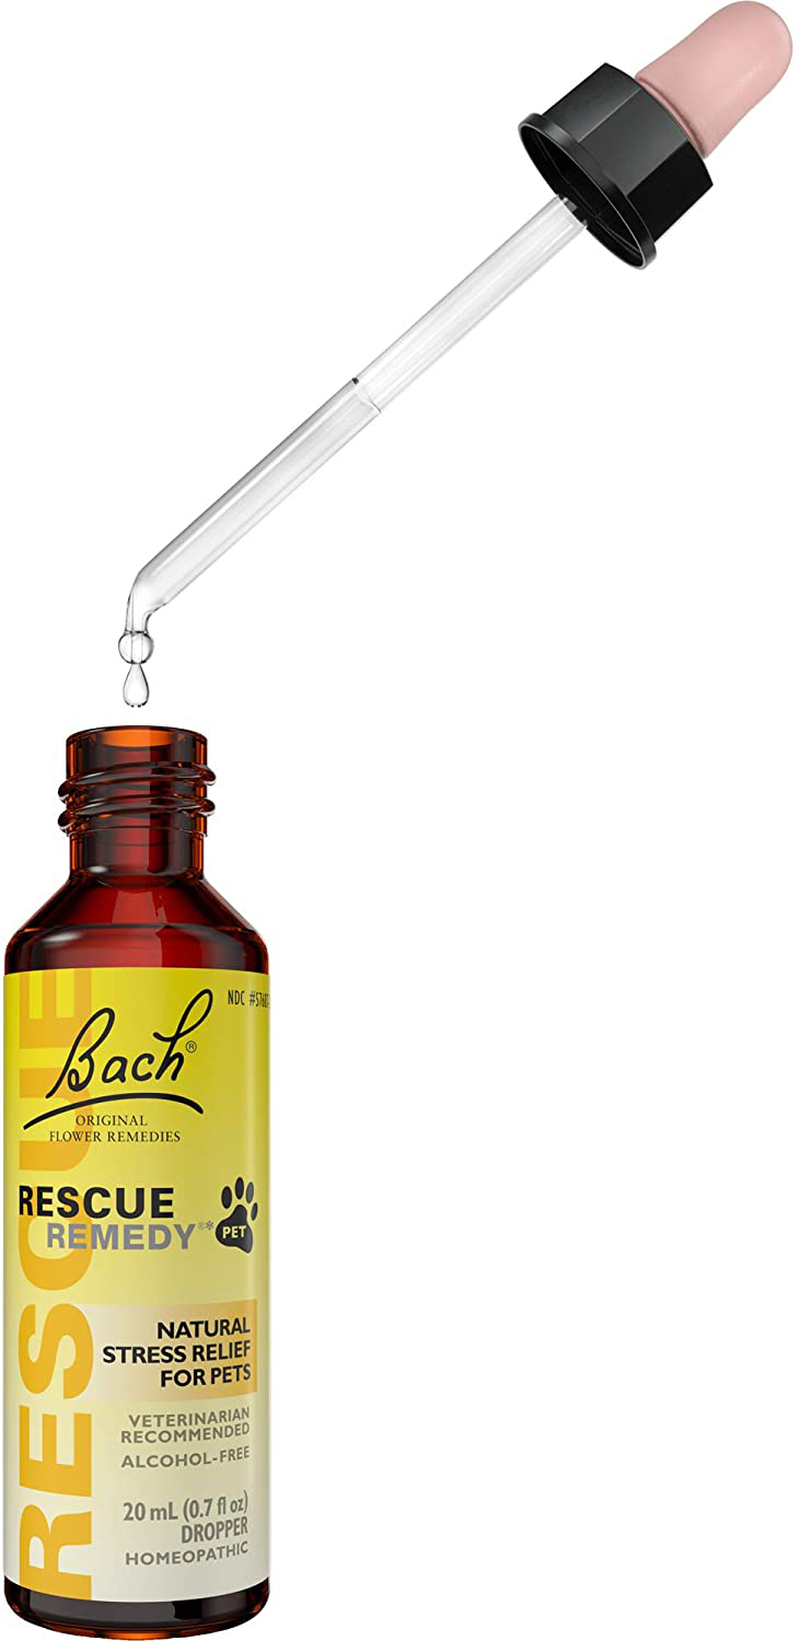 Bach RESCUE REMEDY PET Dropper 20Ml, Natural Stress and Occasional Anxiety Relief, Calming for Dogs, Cats, and Other Pets, Homeopathic Flower Remedy, Thunder, Fireworks and Travel, Sedative-Free